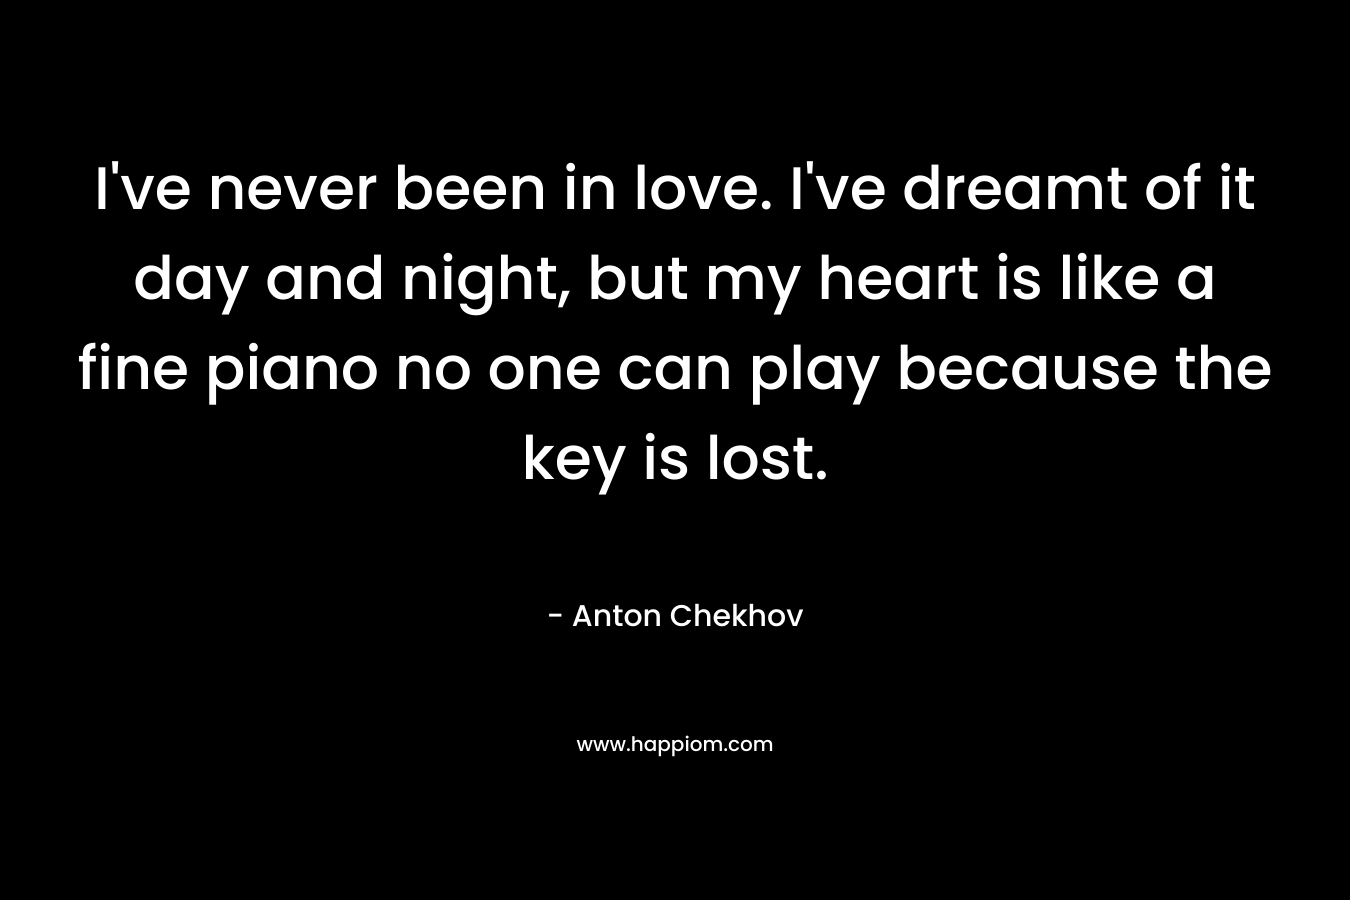 I've never been in love. I've dreamt of it day and night, but my heart is like a fine piano no one can play because the key is lost.